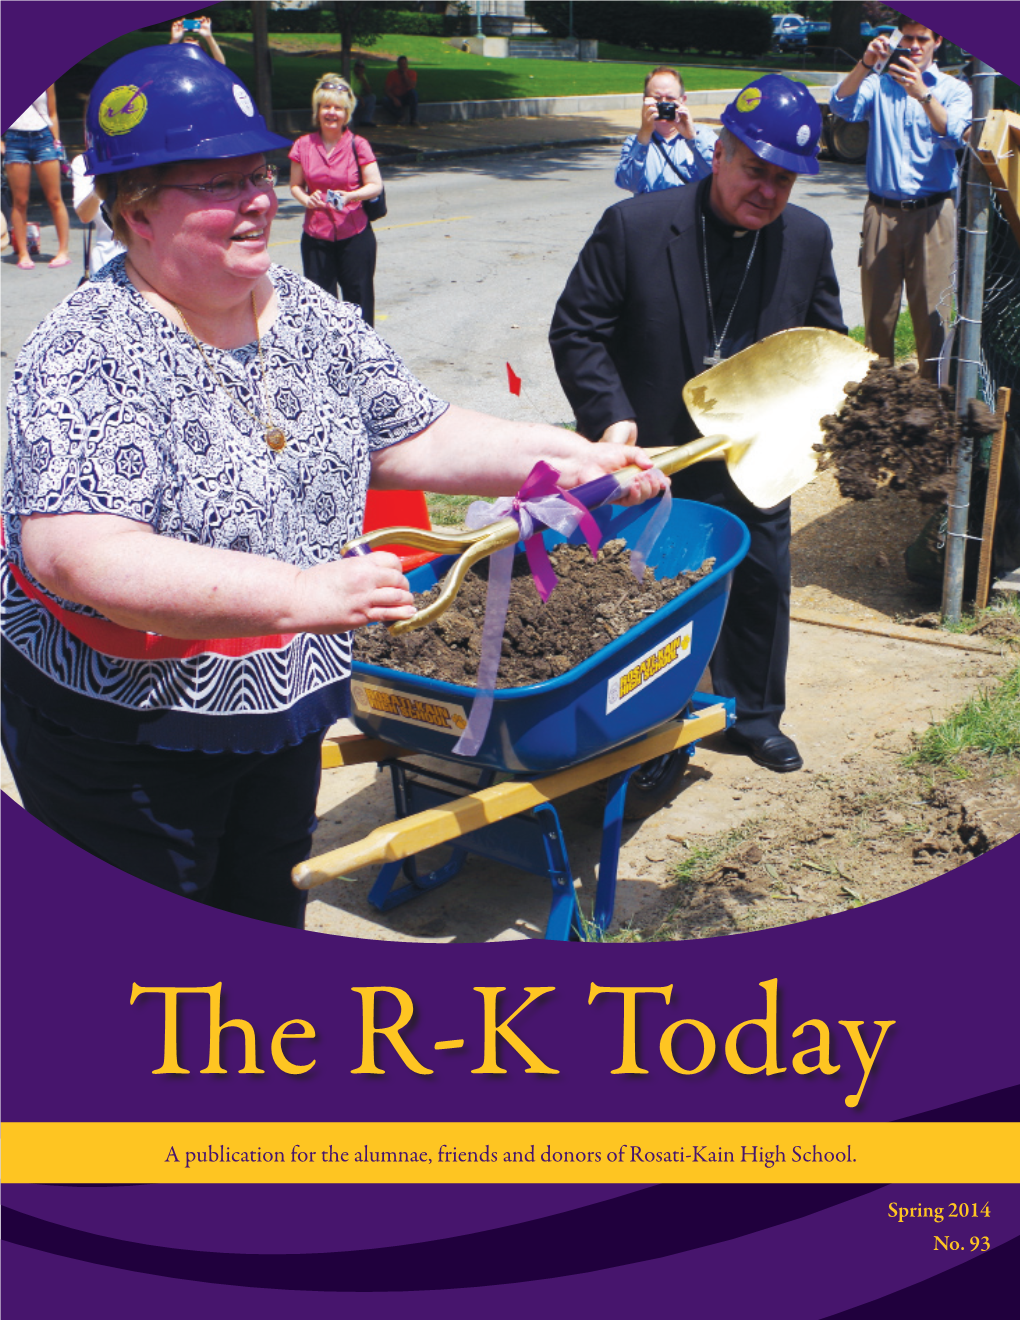 A Publication for the Alumnae, Friends and Donors of Rosati-Kain High School